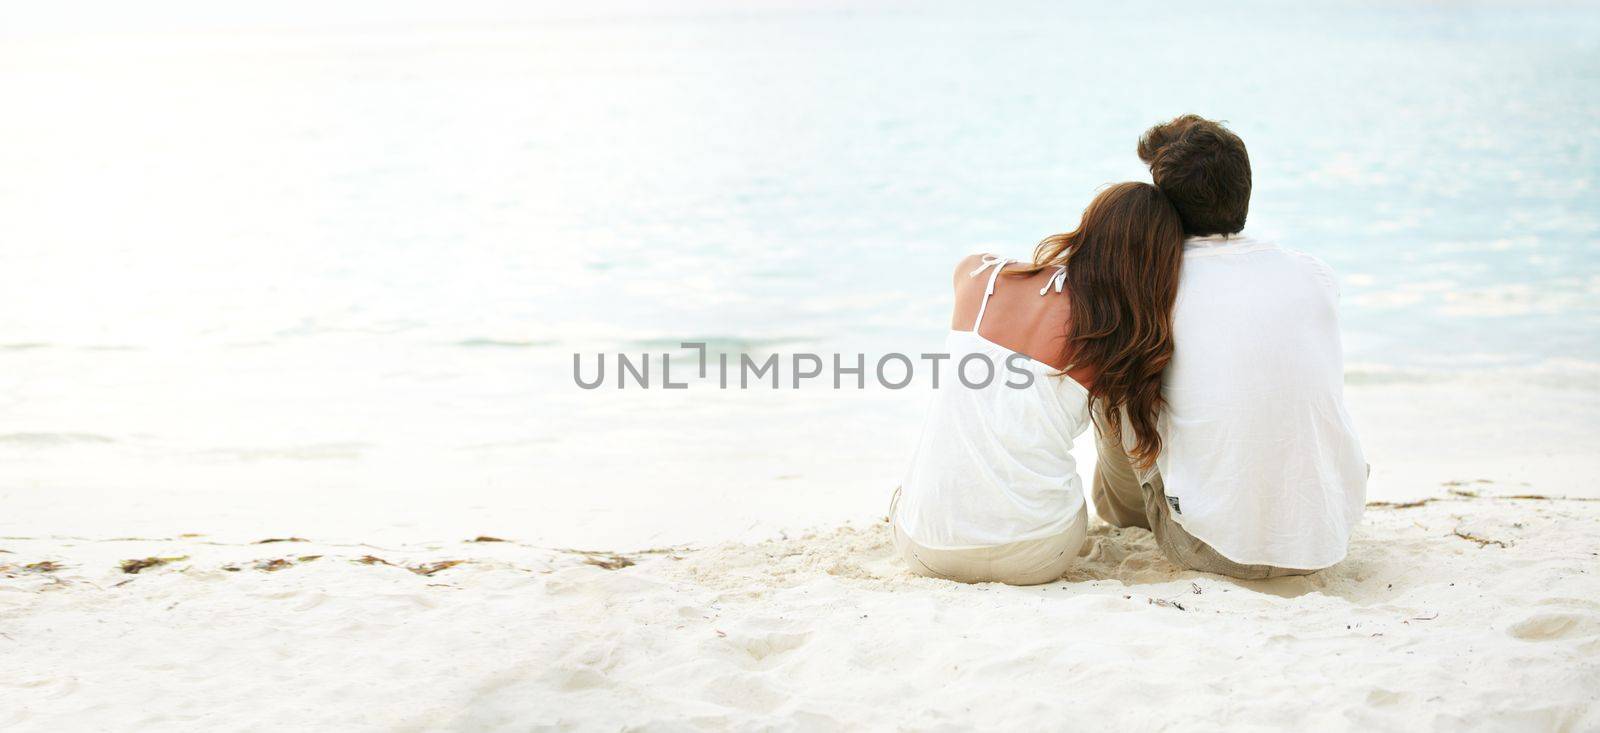 Bonding intimately upon the beach - Love Romance. Two young lovers looking over a calm ocean towards a beautiful sunset - Copyspace